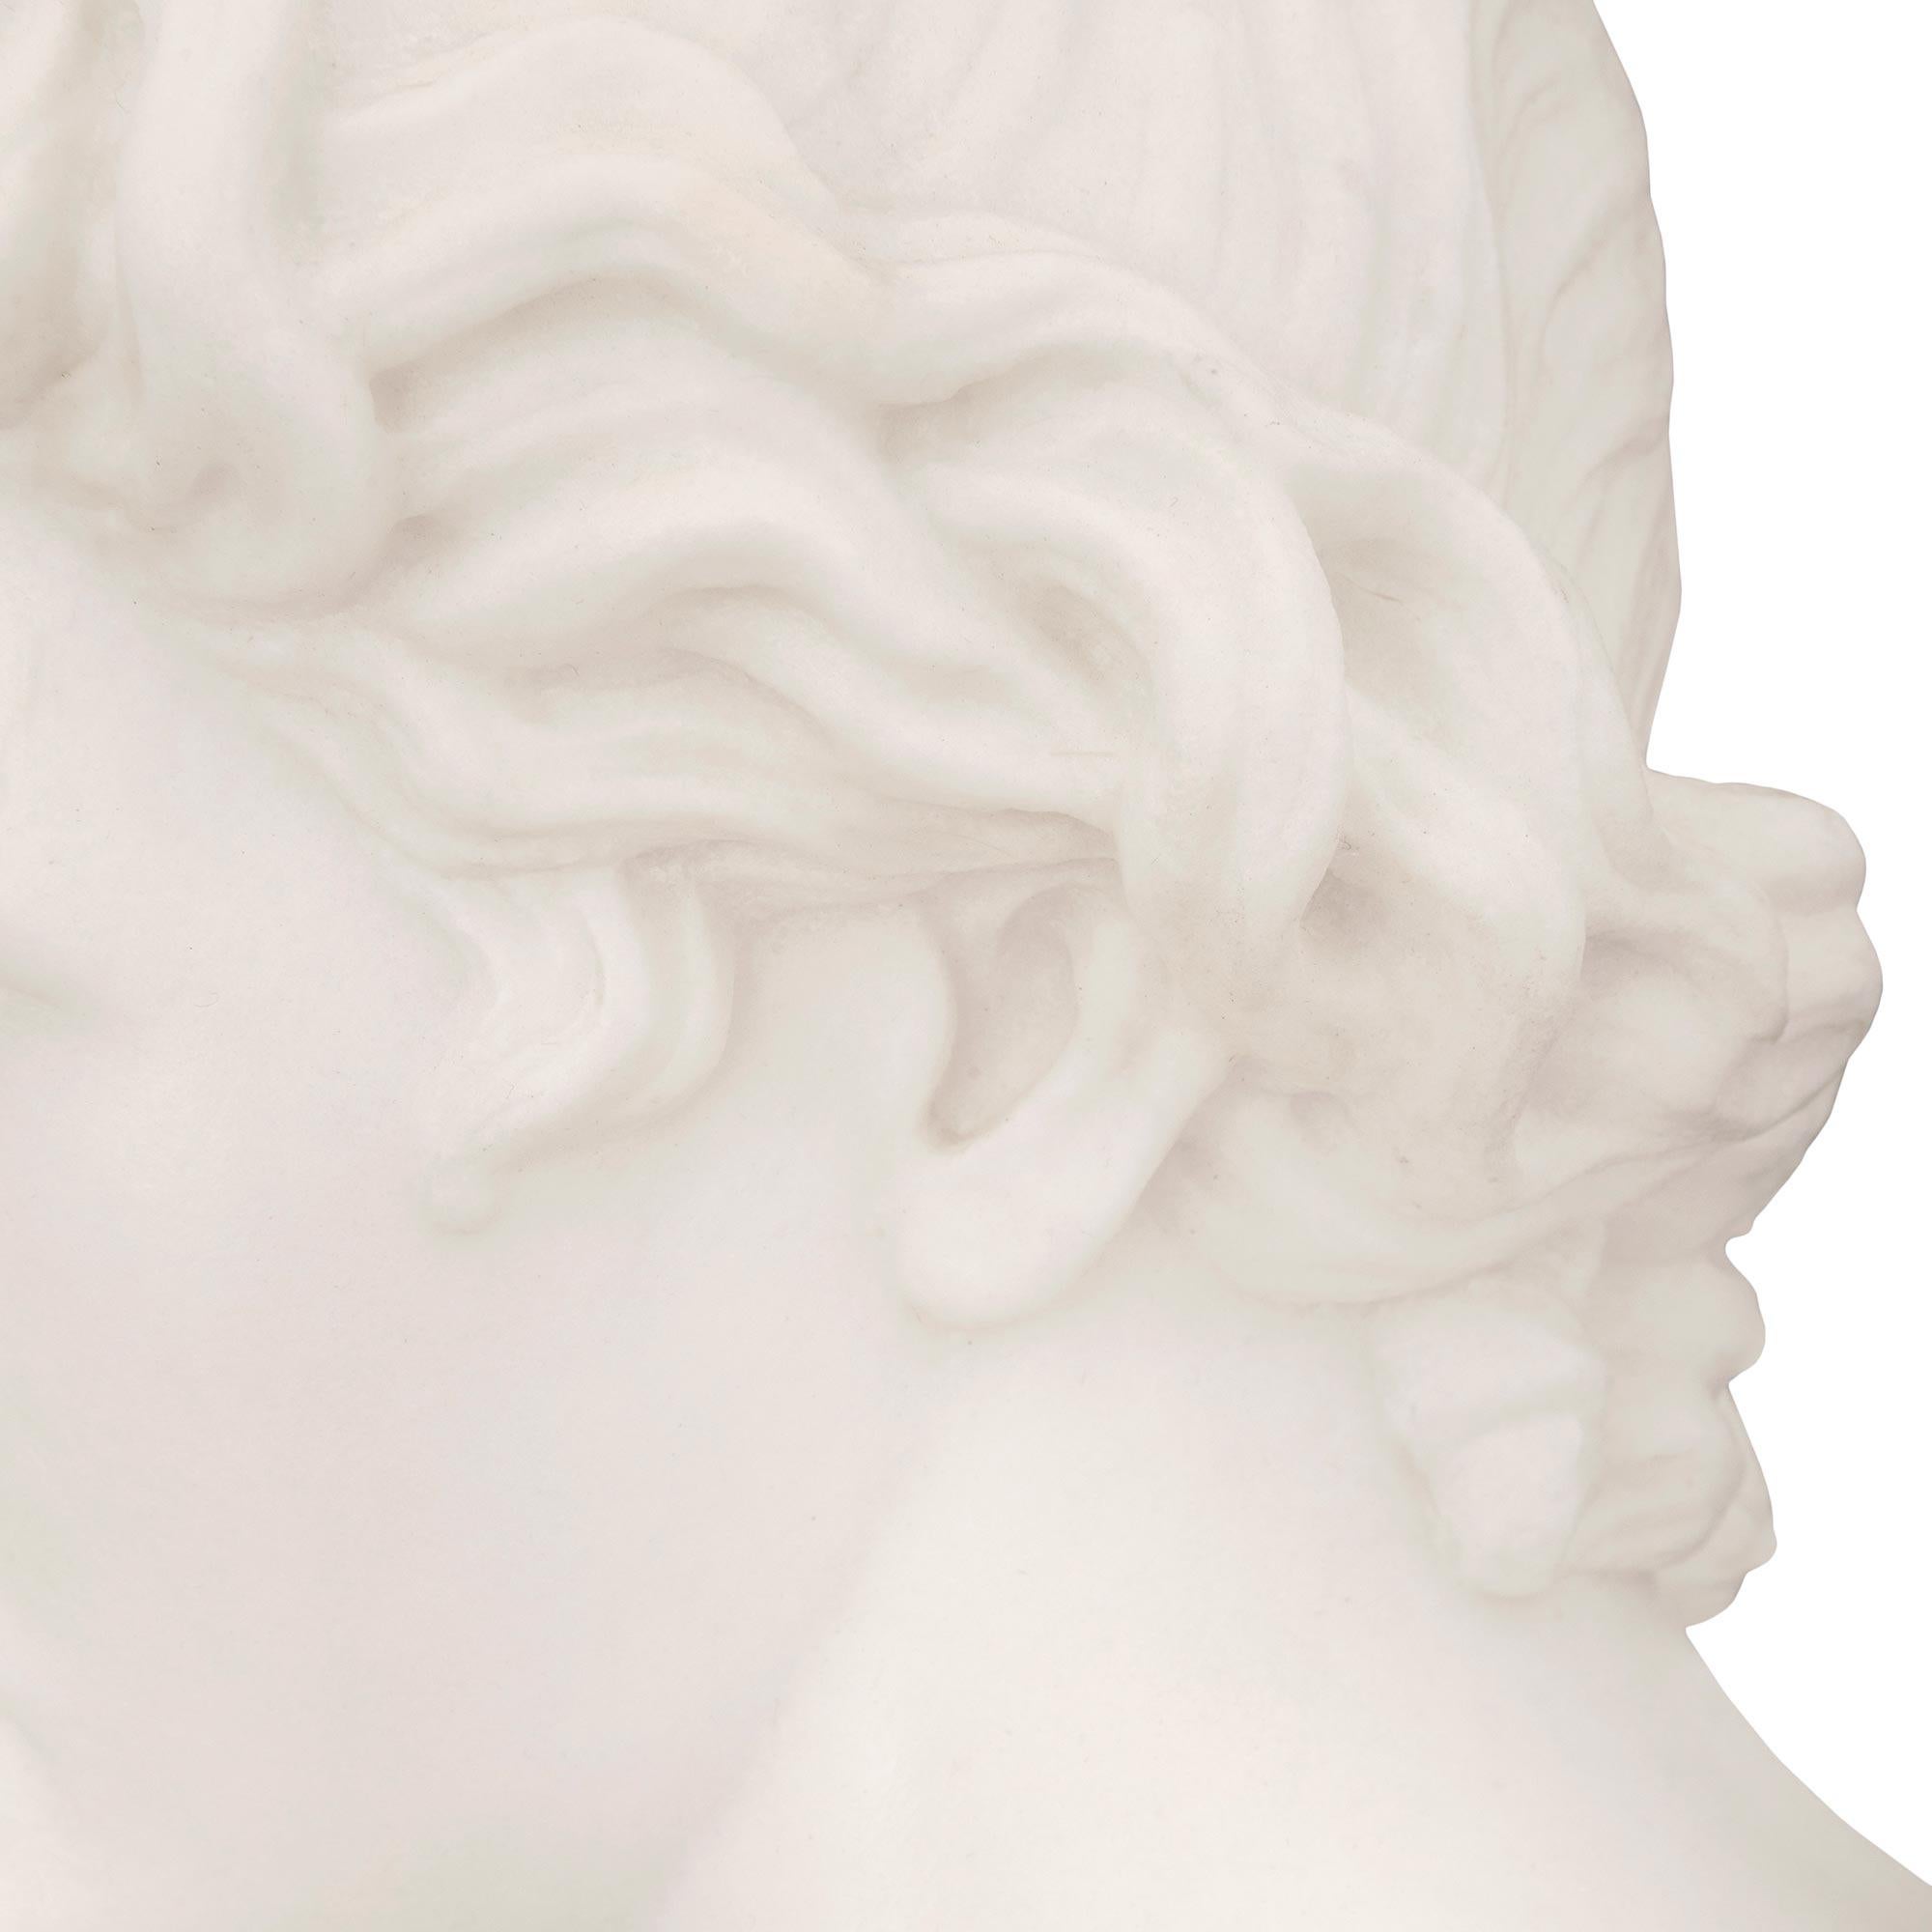 Italian 19th Century Neo-Classical St. Marble Bust of Apollo Belvedere For Sale 1